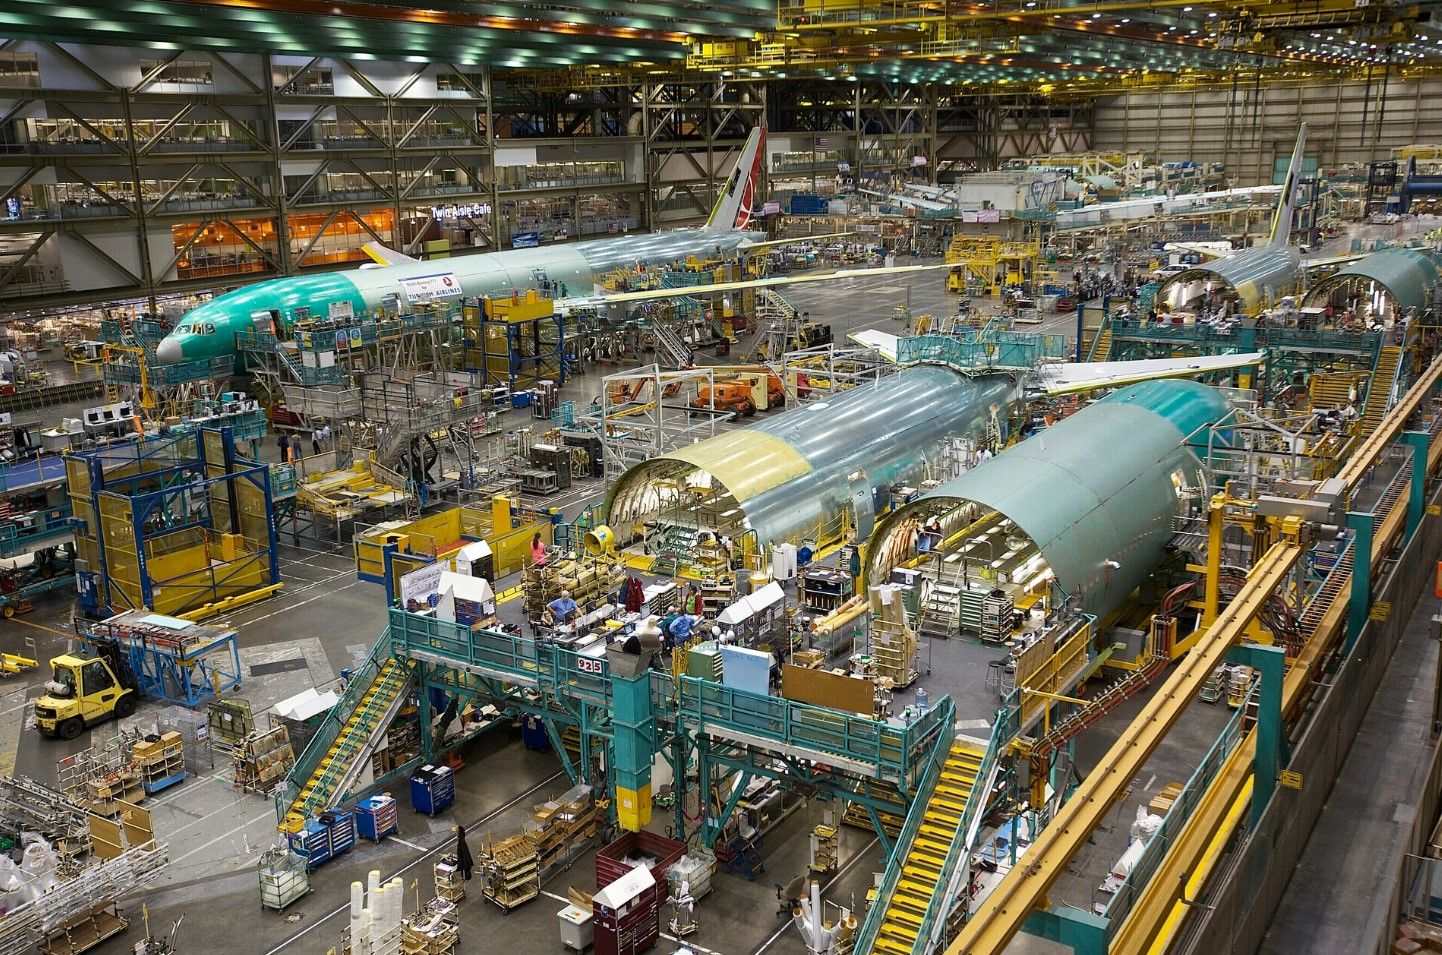 Federal regulators say they will keep closer eye on Boeing